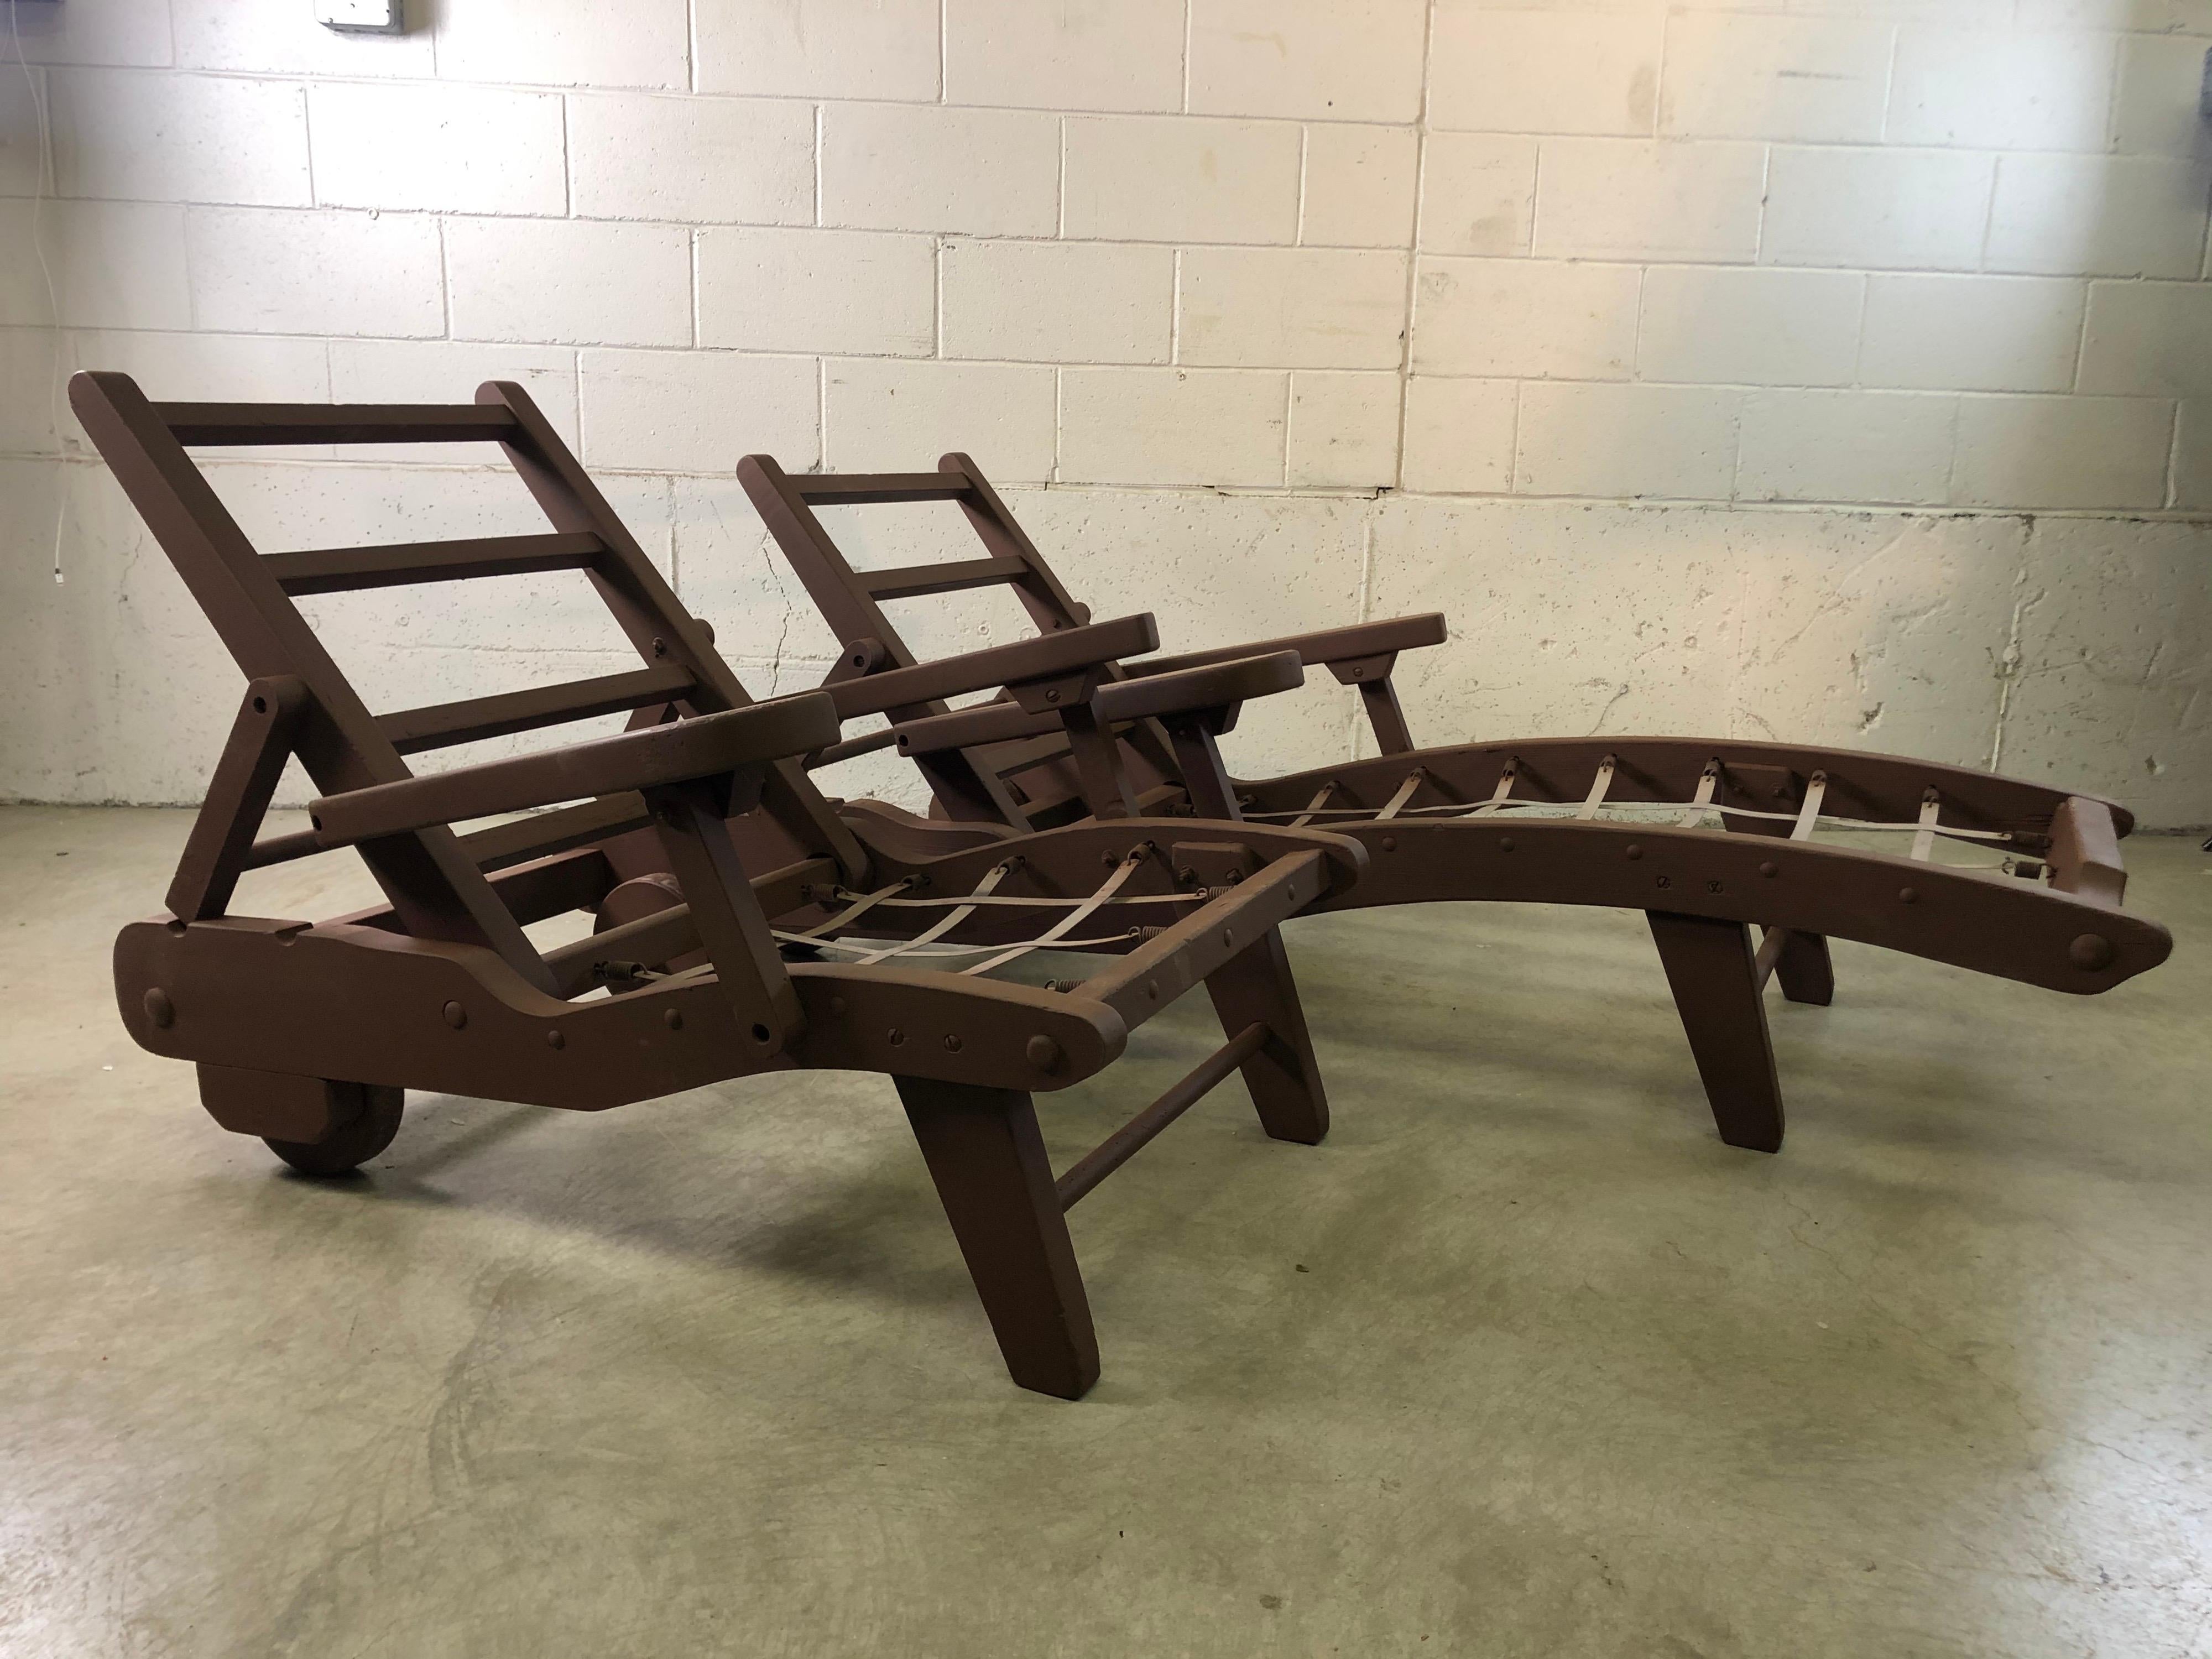 Vintage 1970s pair of outdoor wood chaise lounge and chair set. Both have wheels to roll and are newly repainted. Great sturdy wood outdoor door furniture. Cushions are not included. Metal webbing is tight. Back rests are painted shut. No marks.